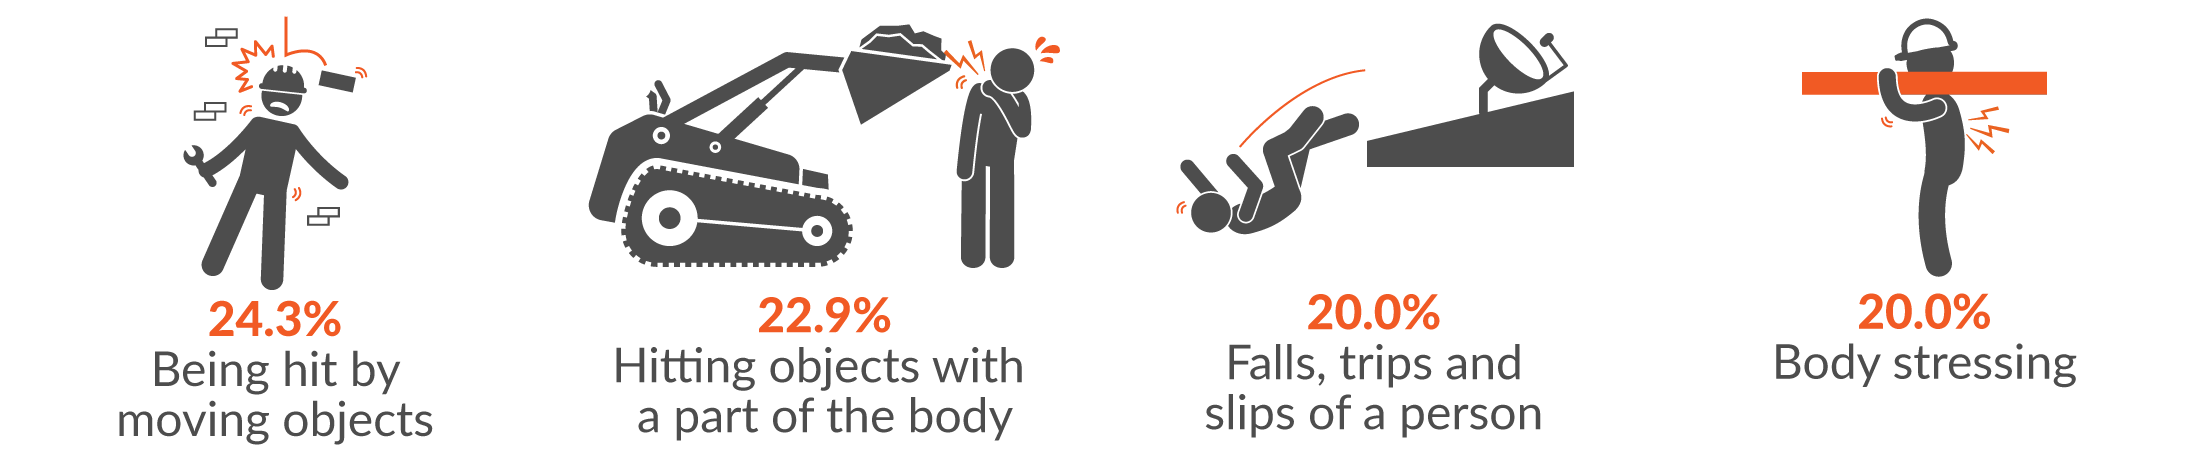 This infographic shows the main three mechanisms of serious injury for Construction claims were 24.3% being hit by moving objects; 22.9% hitting objects with a part of the body; 20% falls, trips and slips of a person; and body stressing (also 20%).